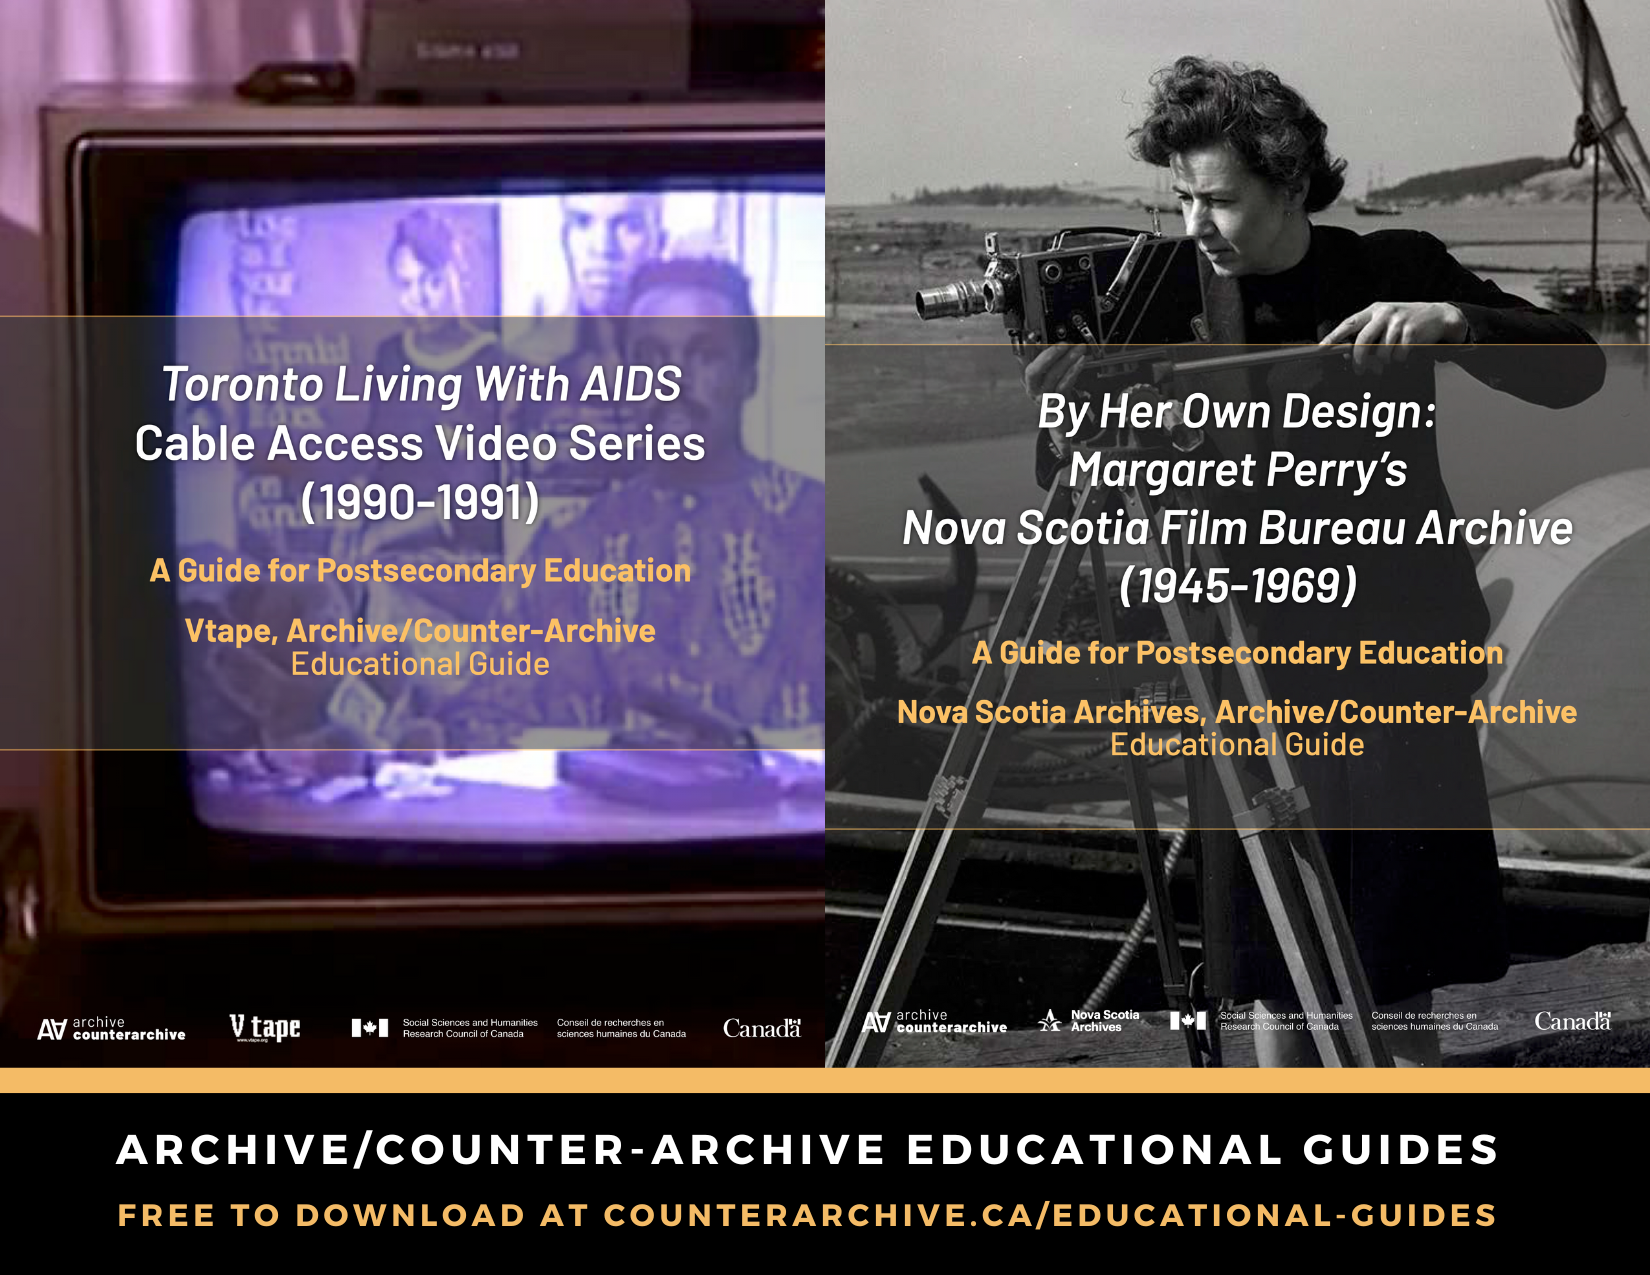 A rectangular promotional image with two book covers placed side by side. The first features a old black and white photograph of a woman operating an old film camera. The second cover features a film still from the 80s of an old CRT television set that has a purple glow to it.